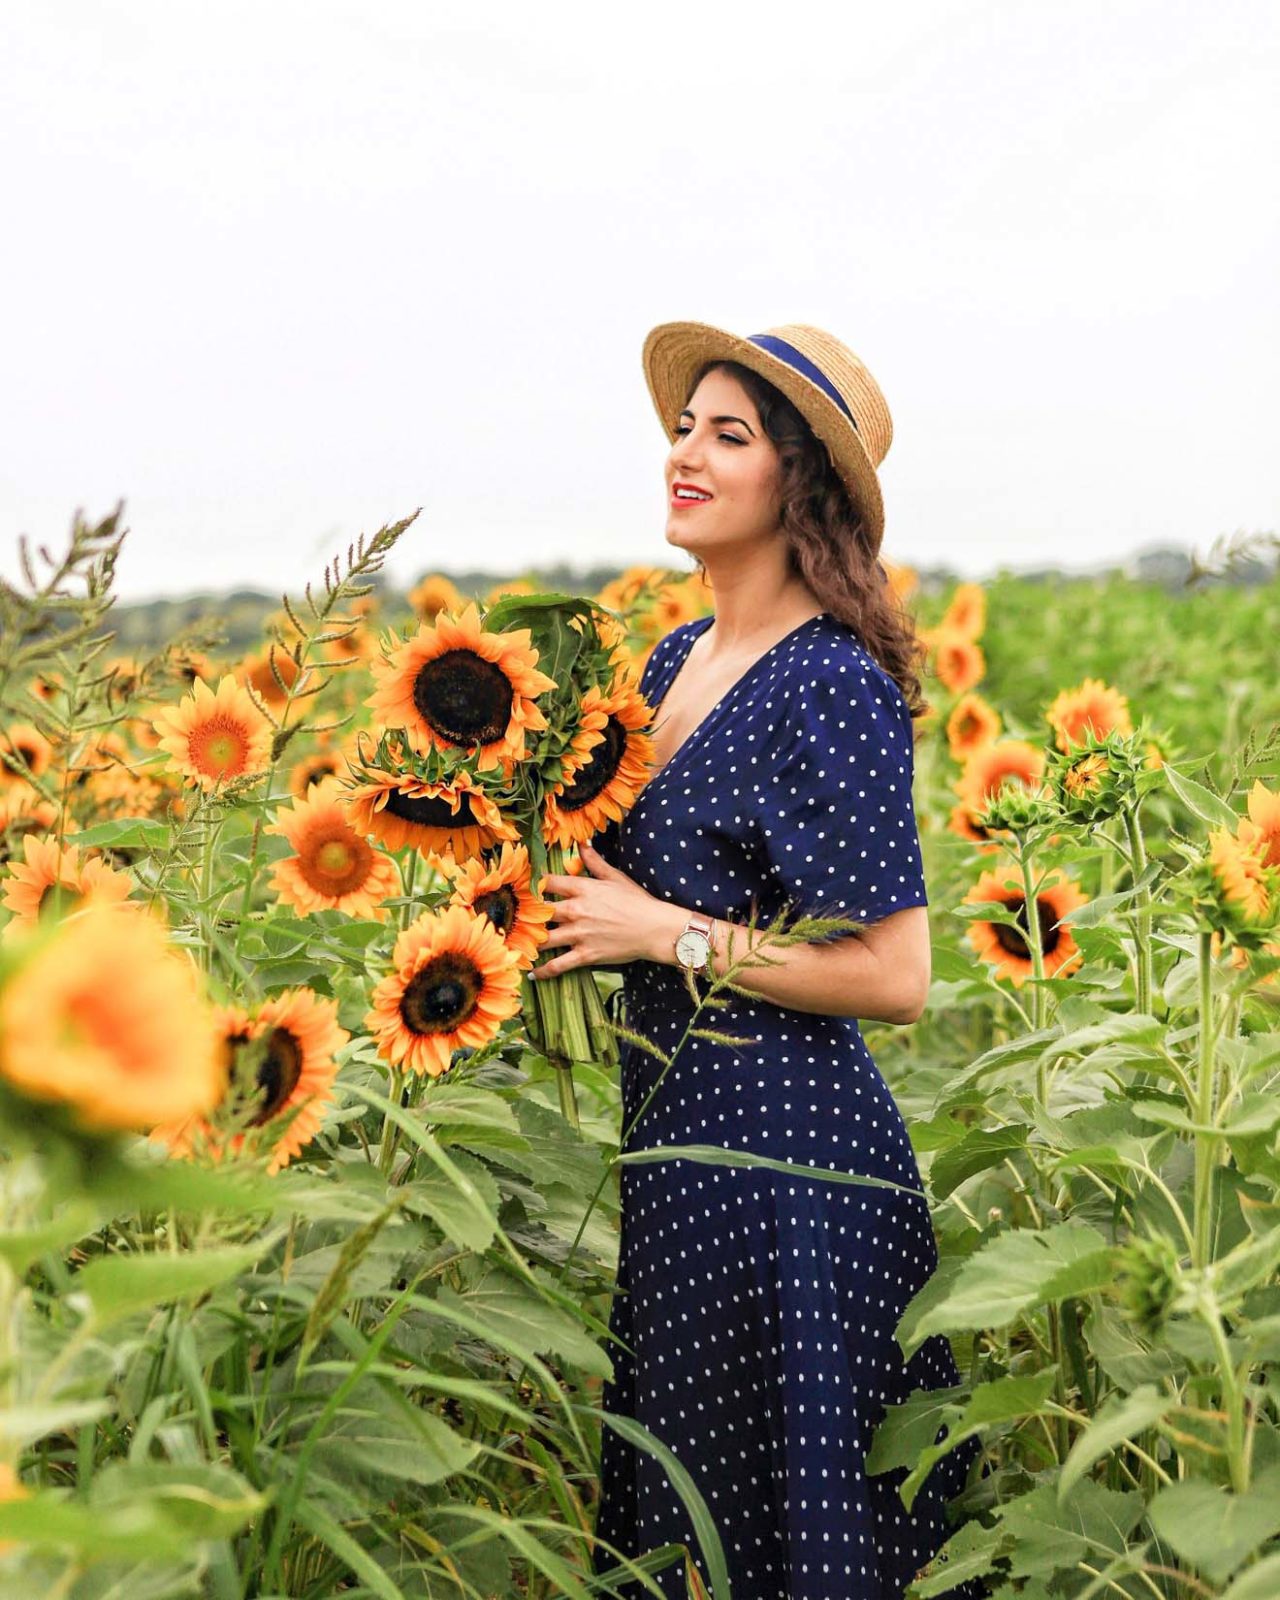 Hamptons Travel Guide, Laura Lily Fashion Travel and Lifestyle Blog, Best Places to See in The Hamptons, Seven Ponds Sunflower Fields